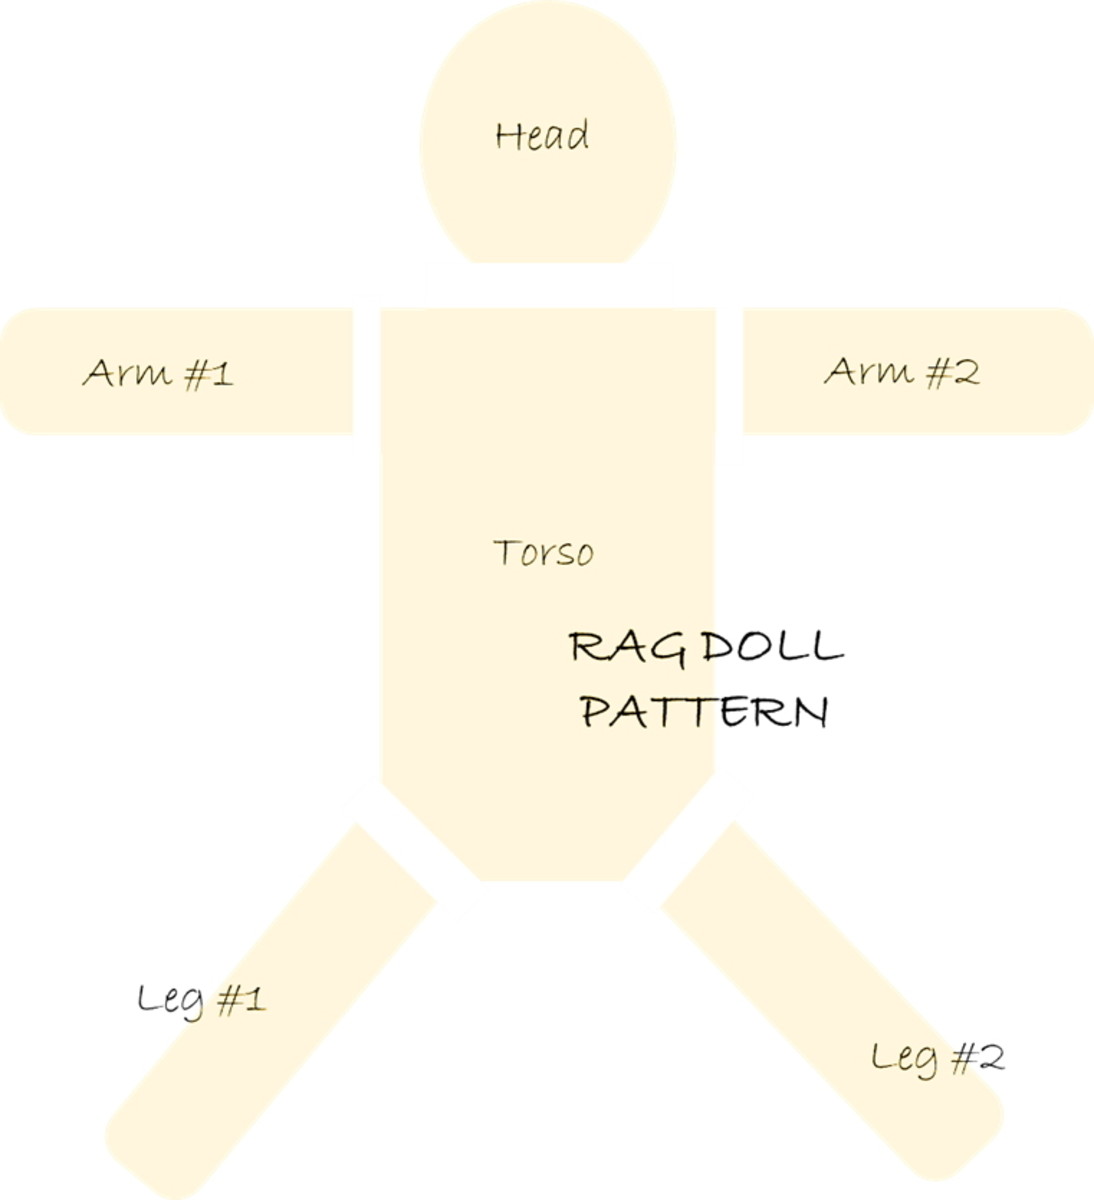 A ragdoll pattern showing the different body parts.